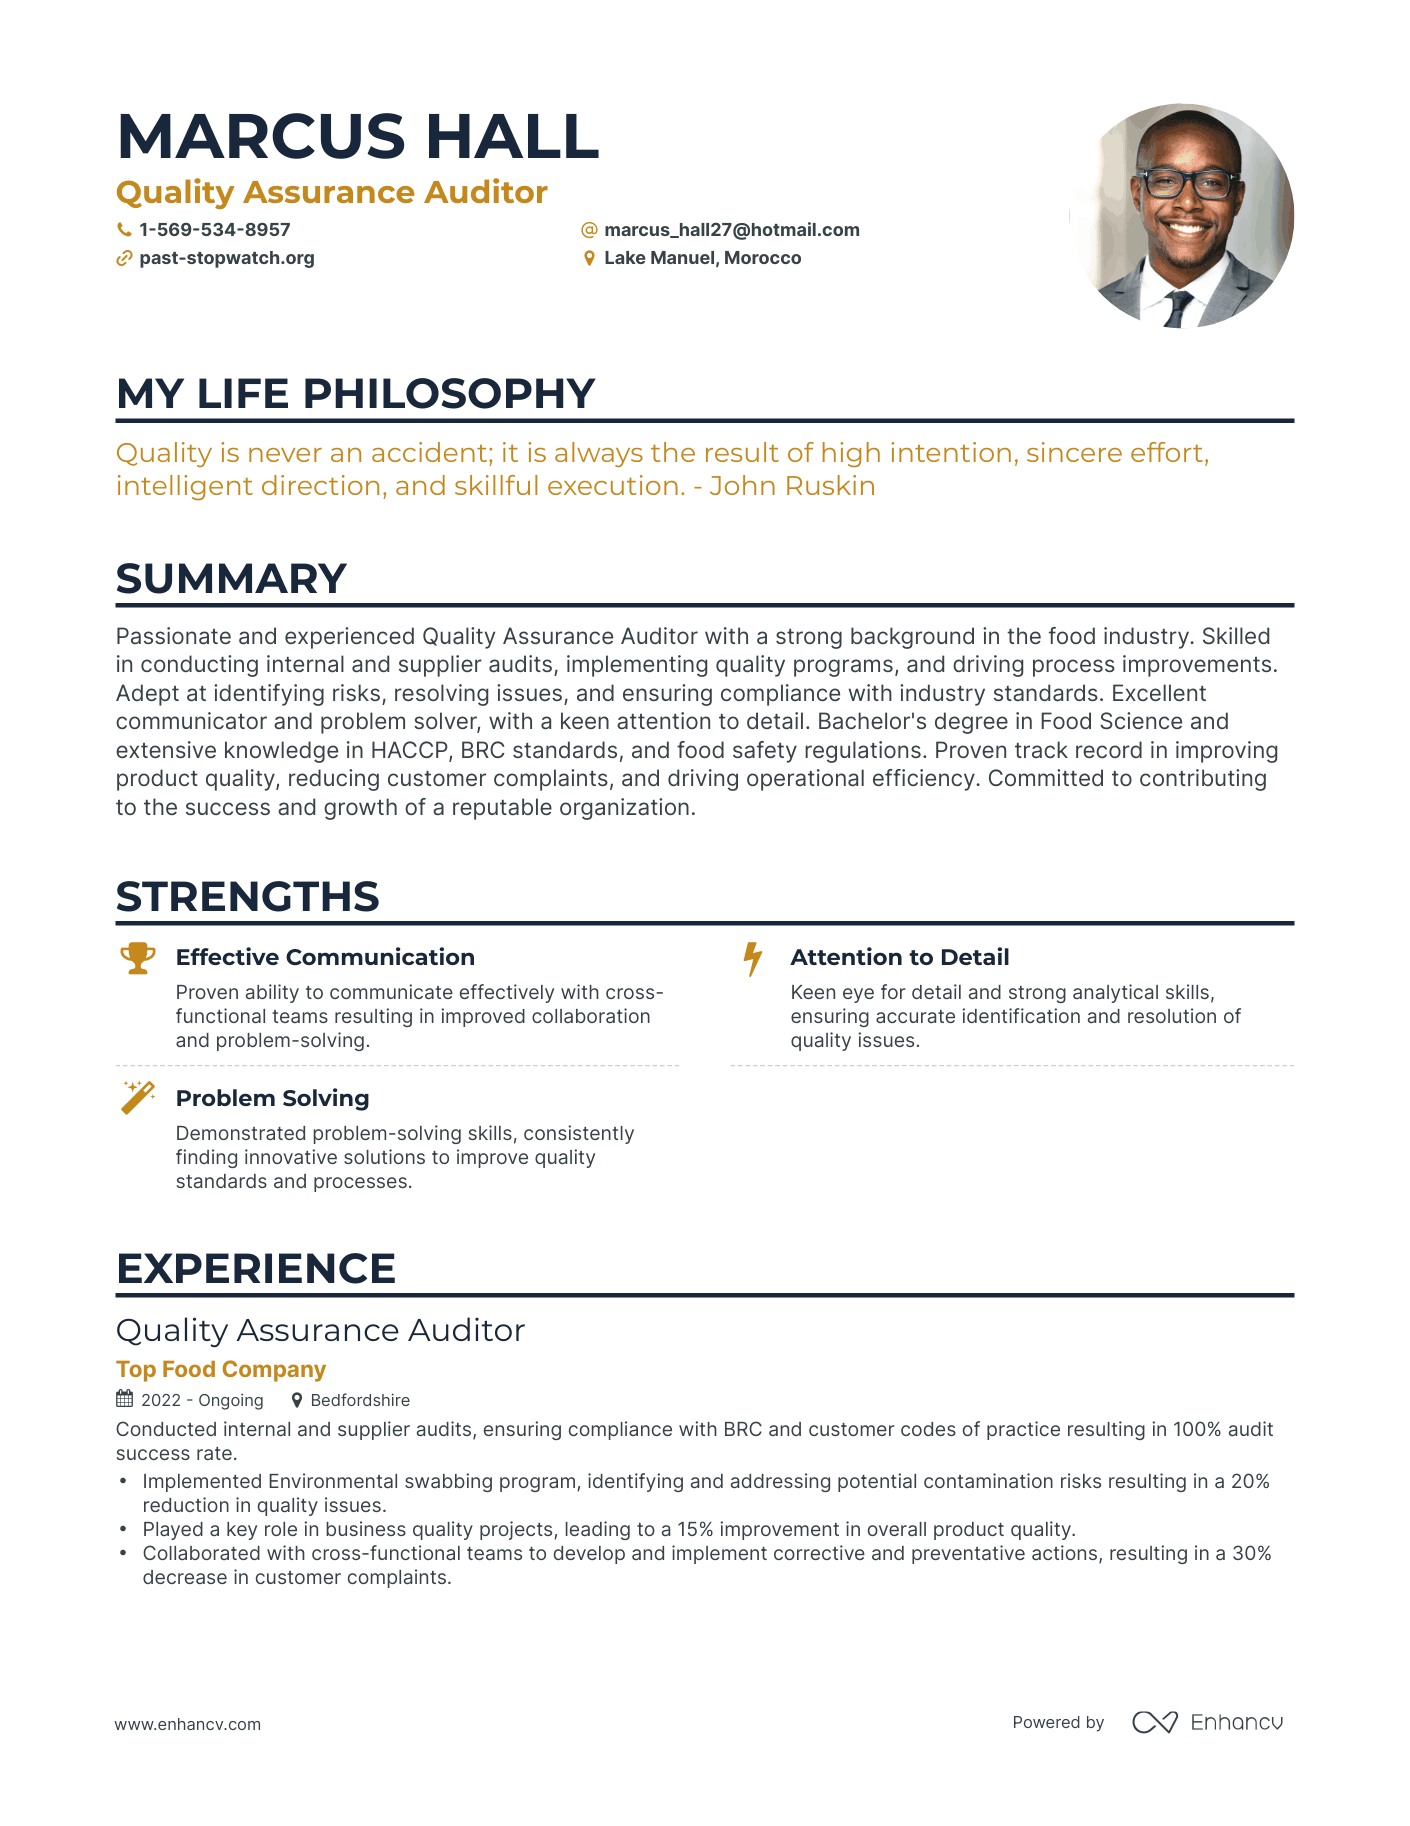 Creative Quality Assurance Auditor Resume Example